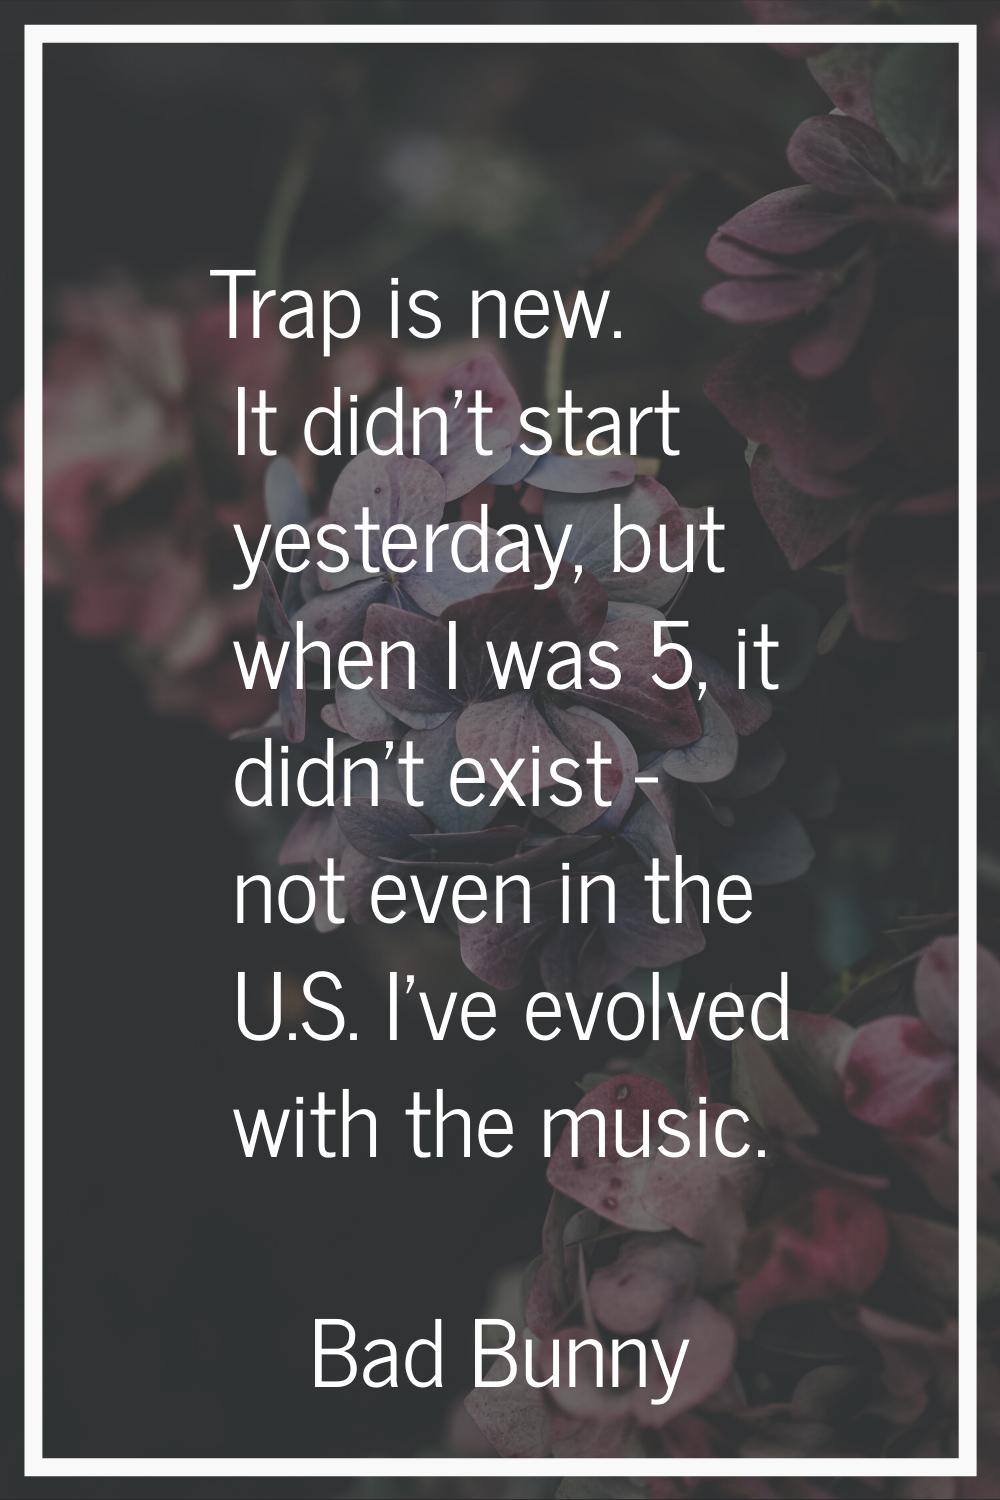 Trap is new. It didn't start yesterday, but when I was 5, it didn't exist - not even in the U.S. I'